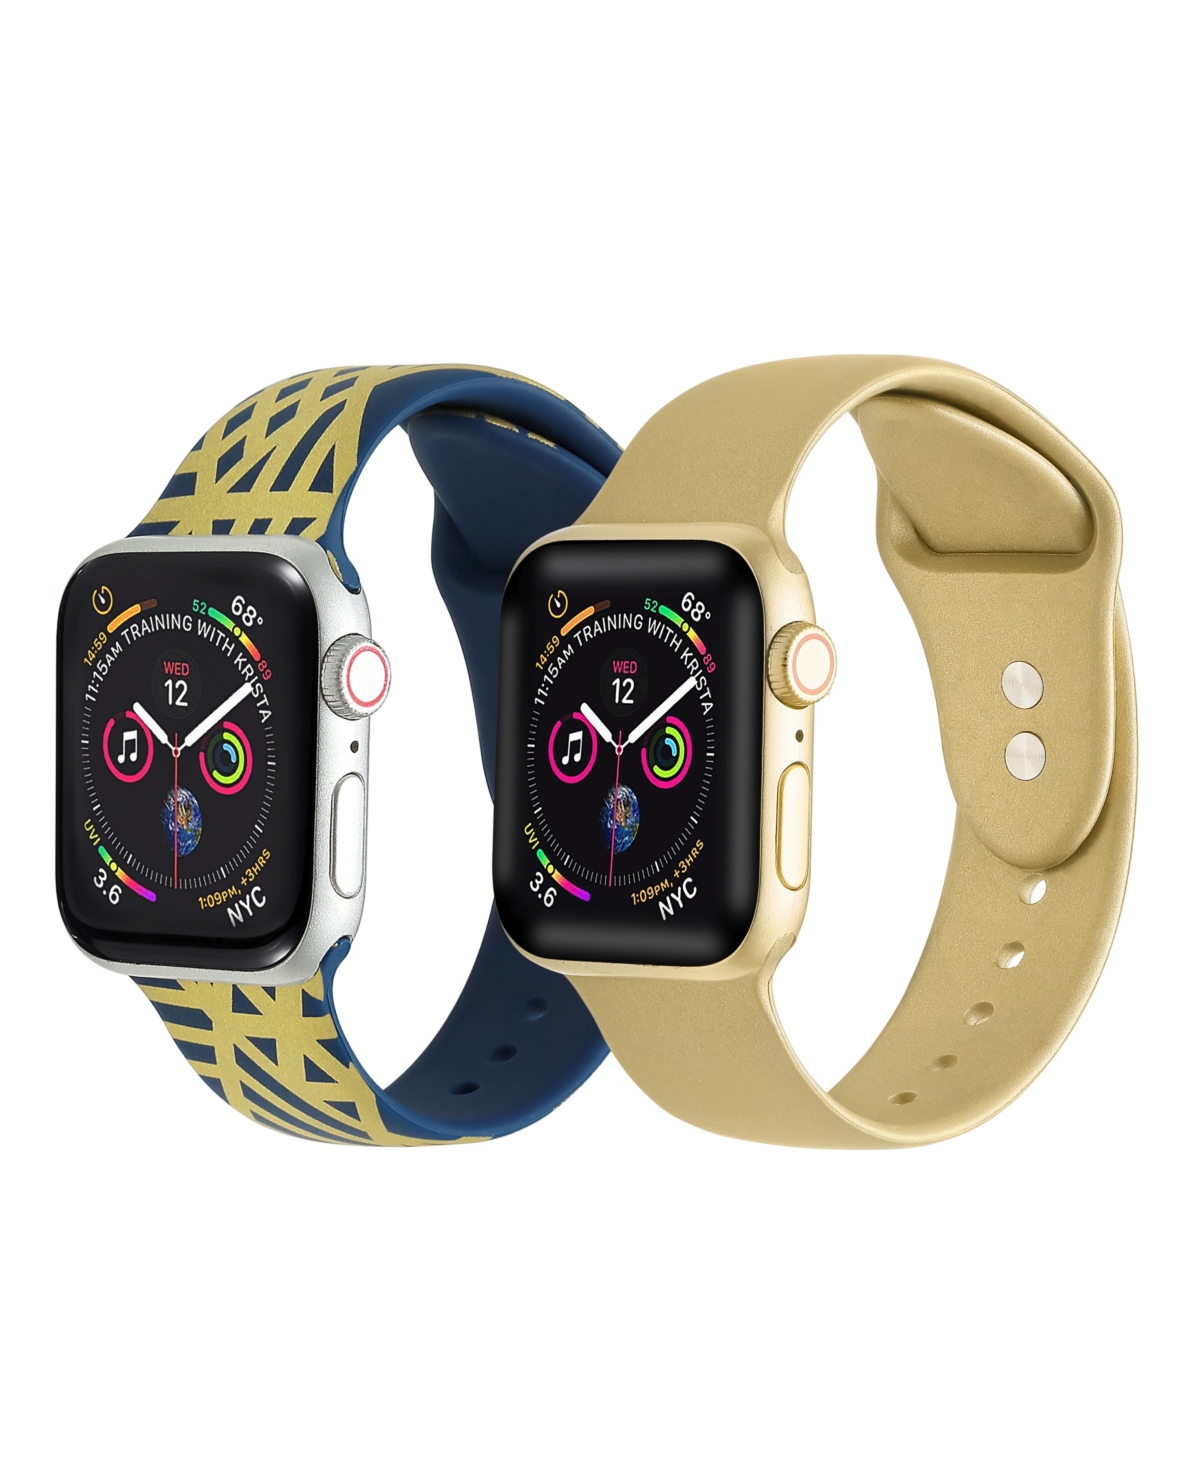 Men's and Women's Geometric Gold-Tone Metallic 2 Piece Silicone Band for Apple Watch 38mm - Multi